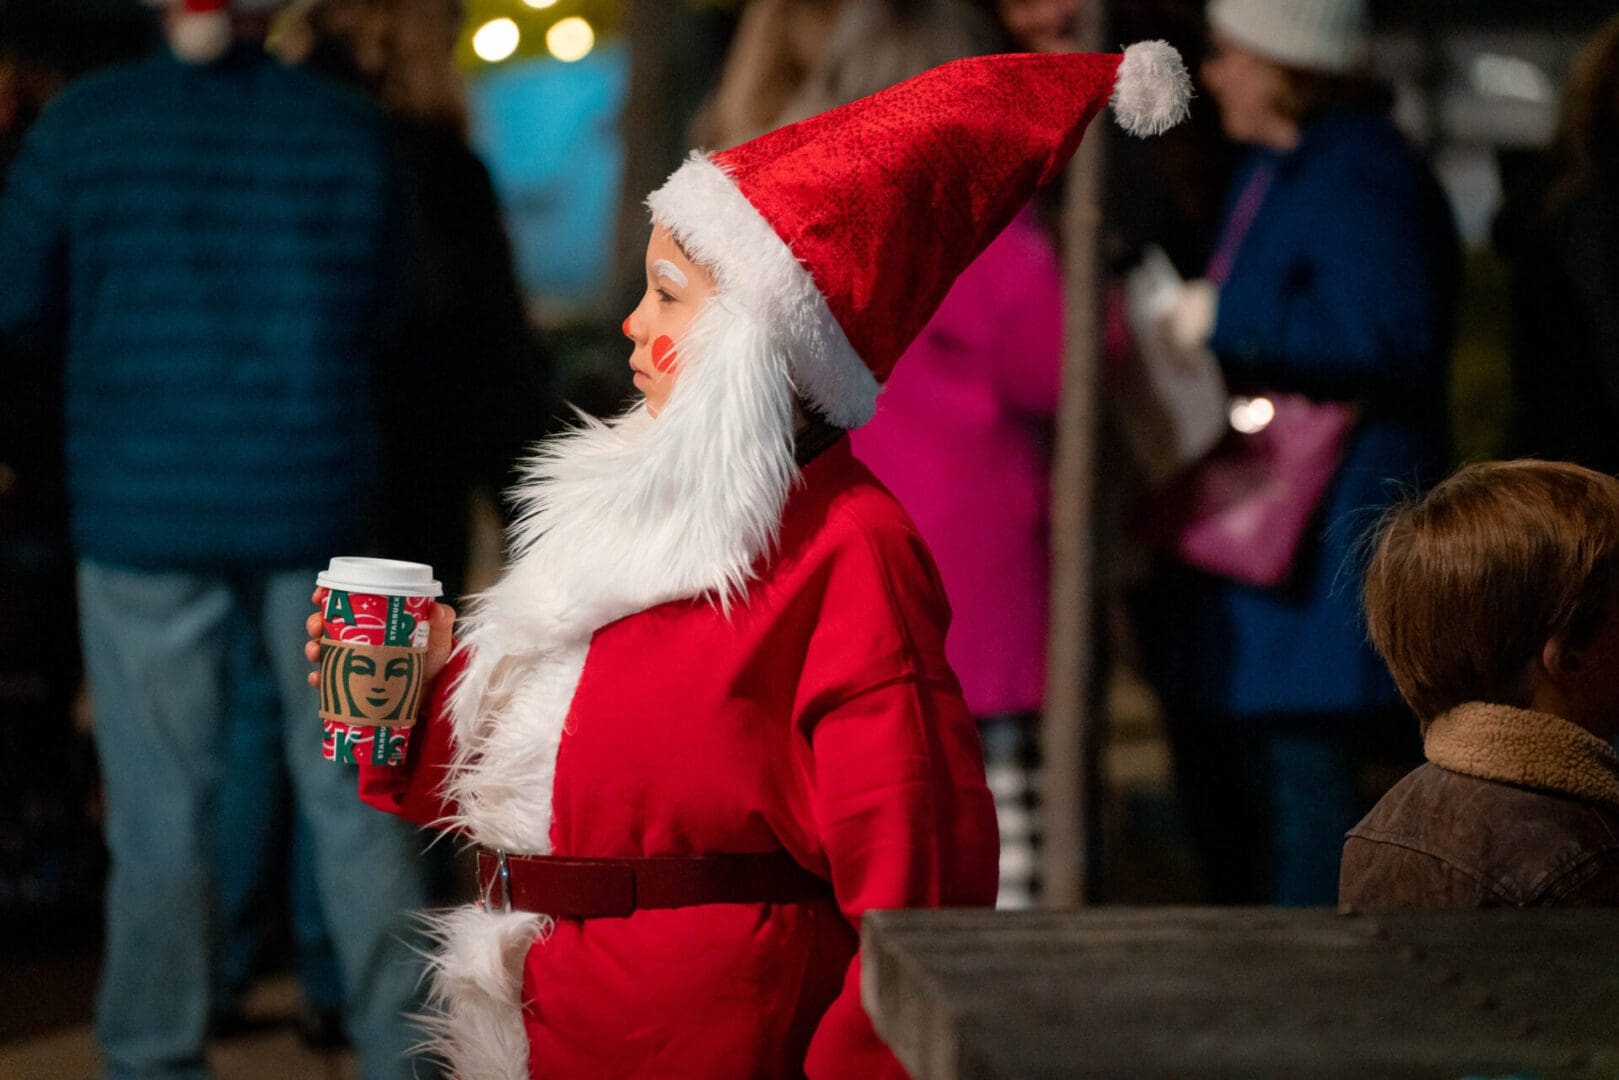 A person dressed as santa claus holding a cup of coffee.